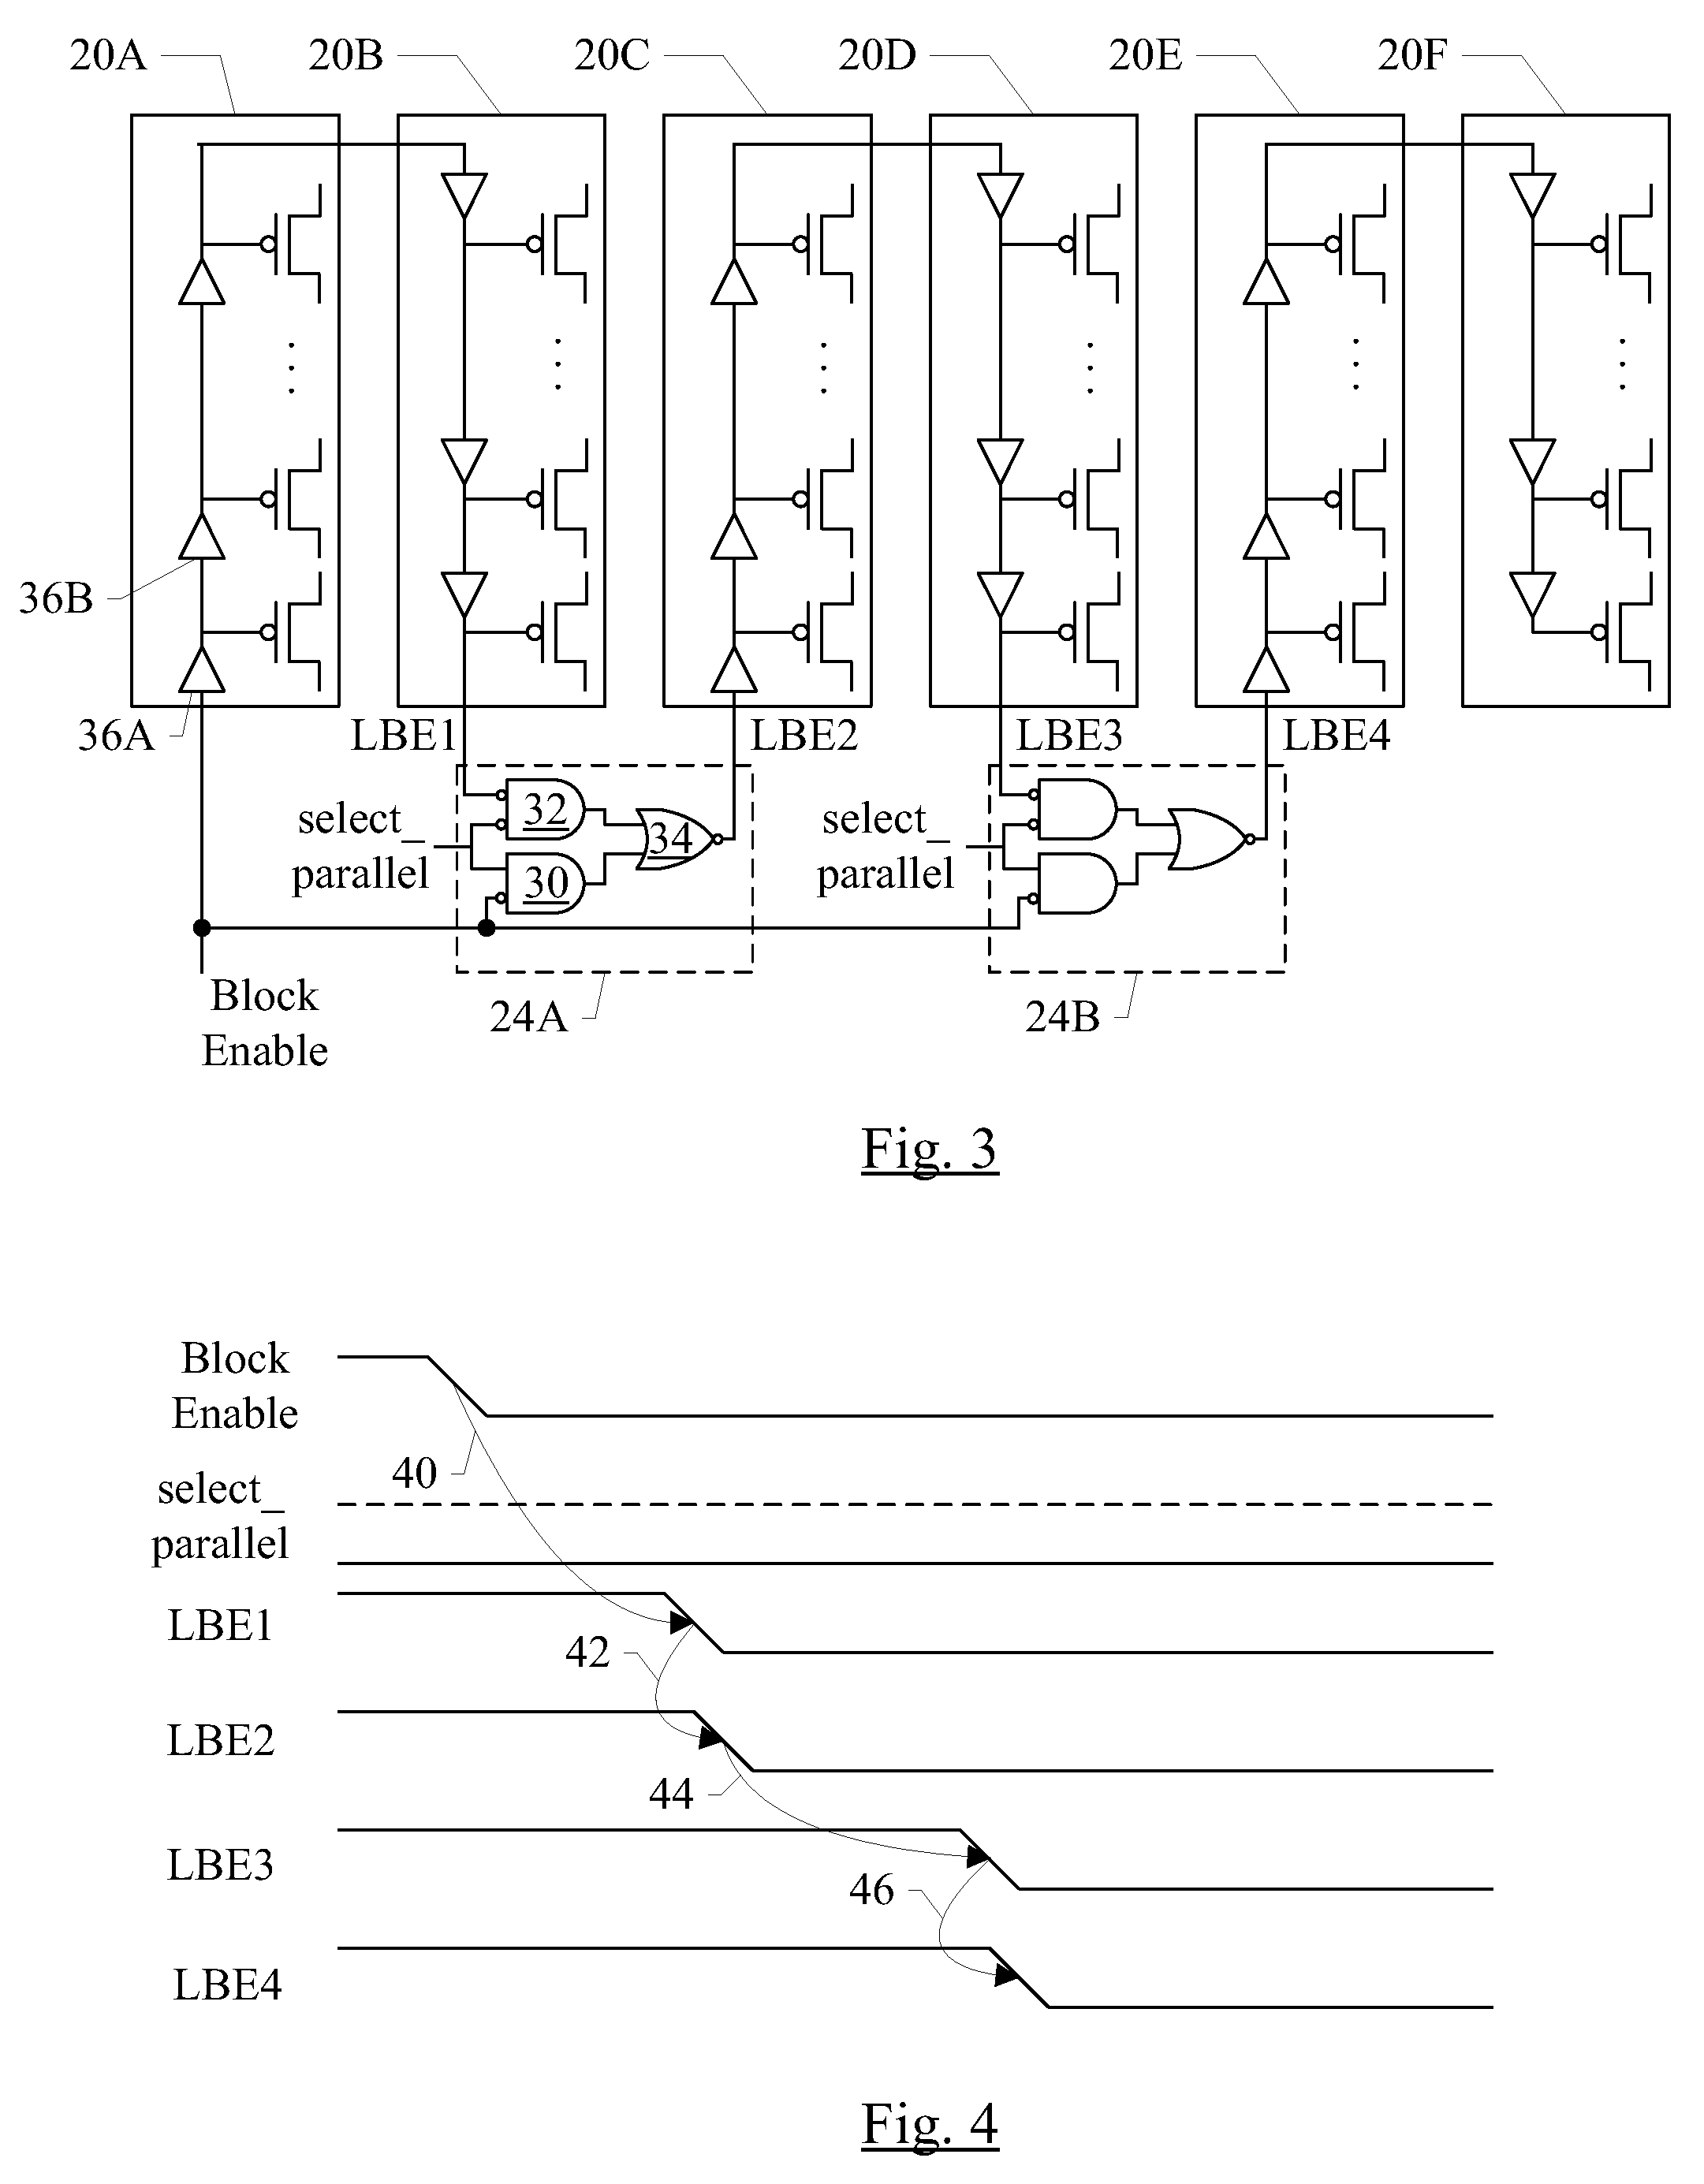 Power switch ramp rate control using programmable connection to switches